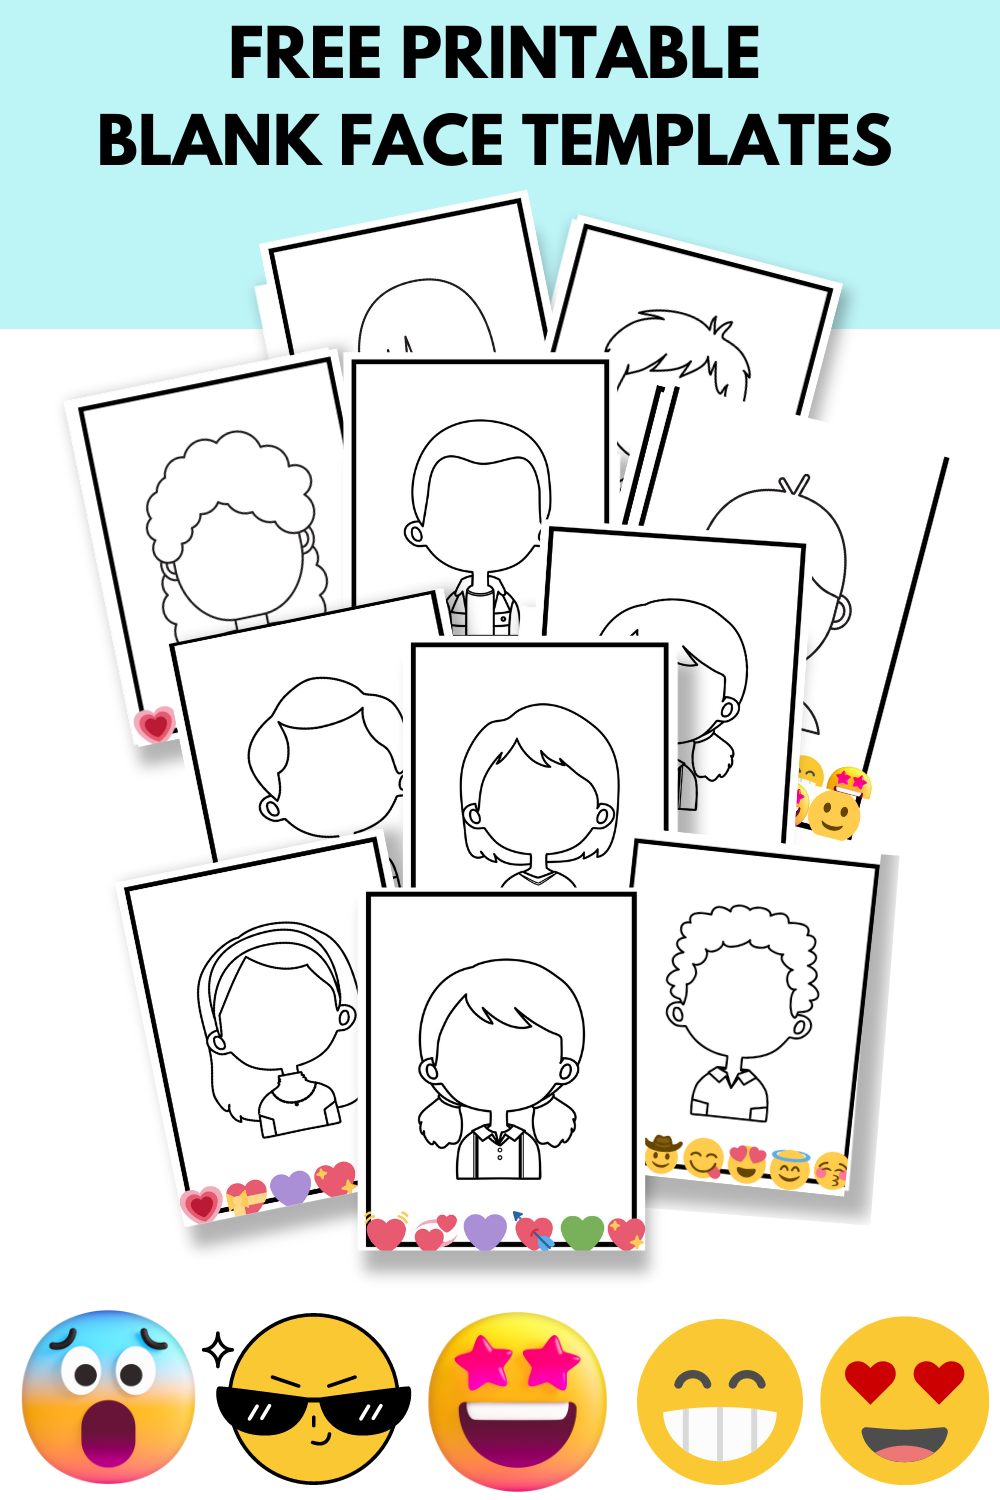 18 Free Blank Face Template Printables